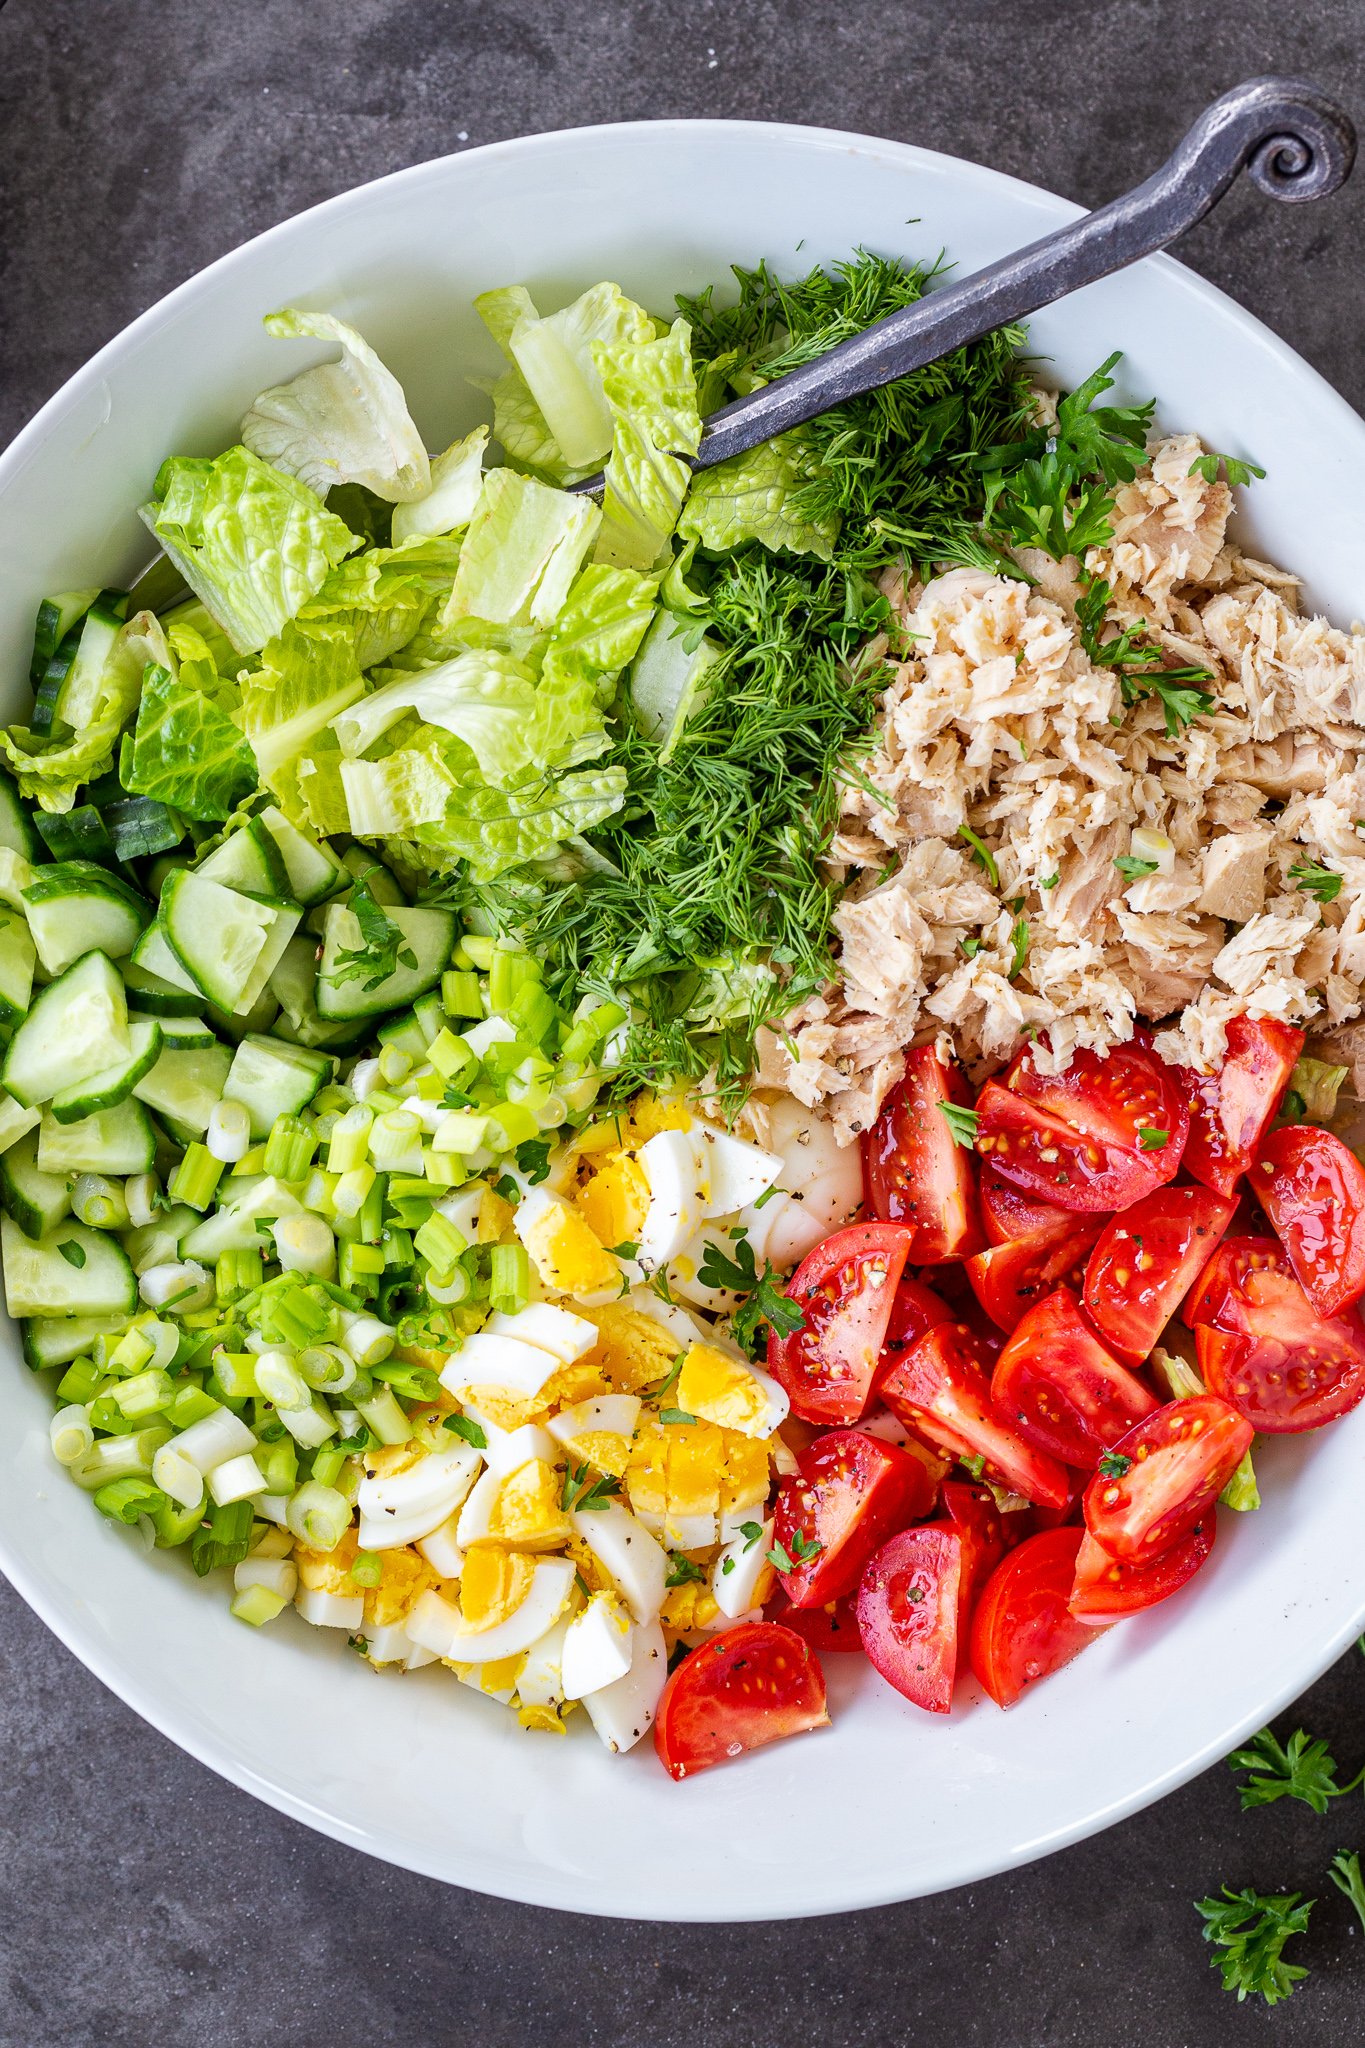 The Way You Chop Your Vegetables For Tuna Salad Matters